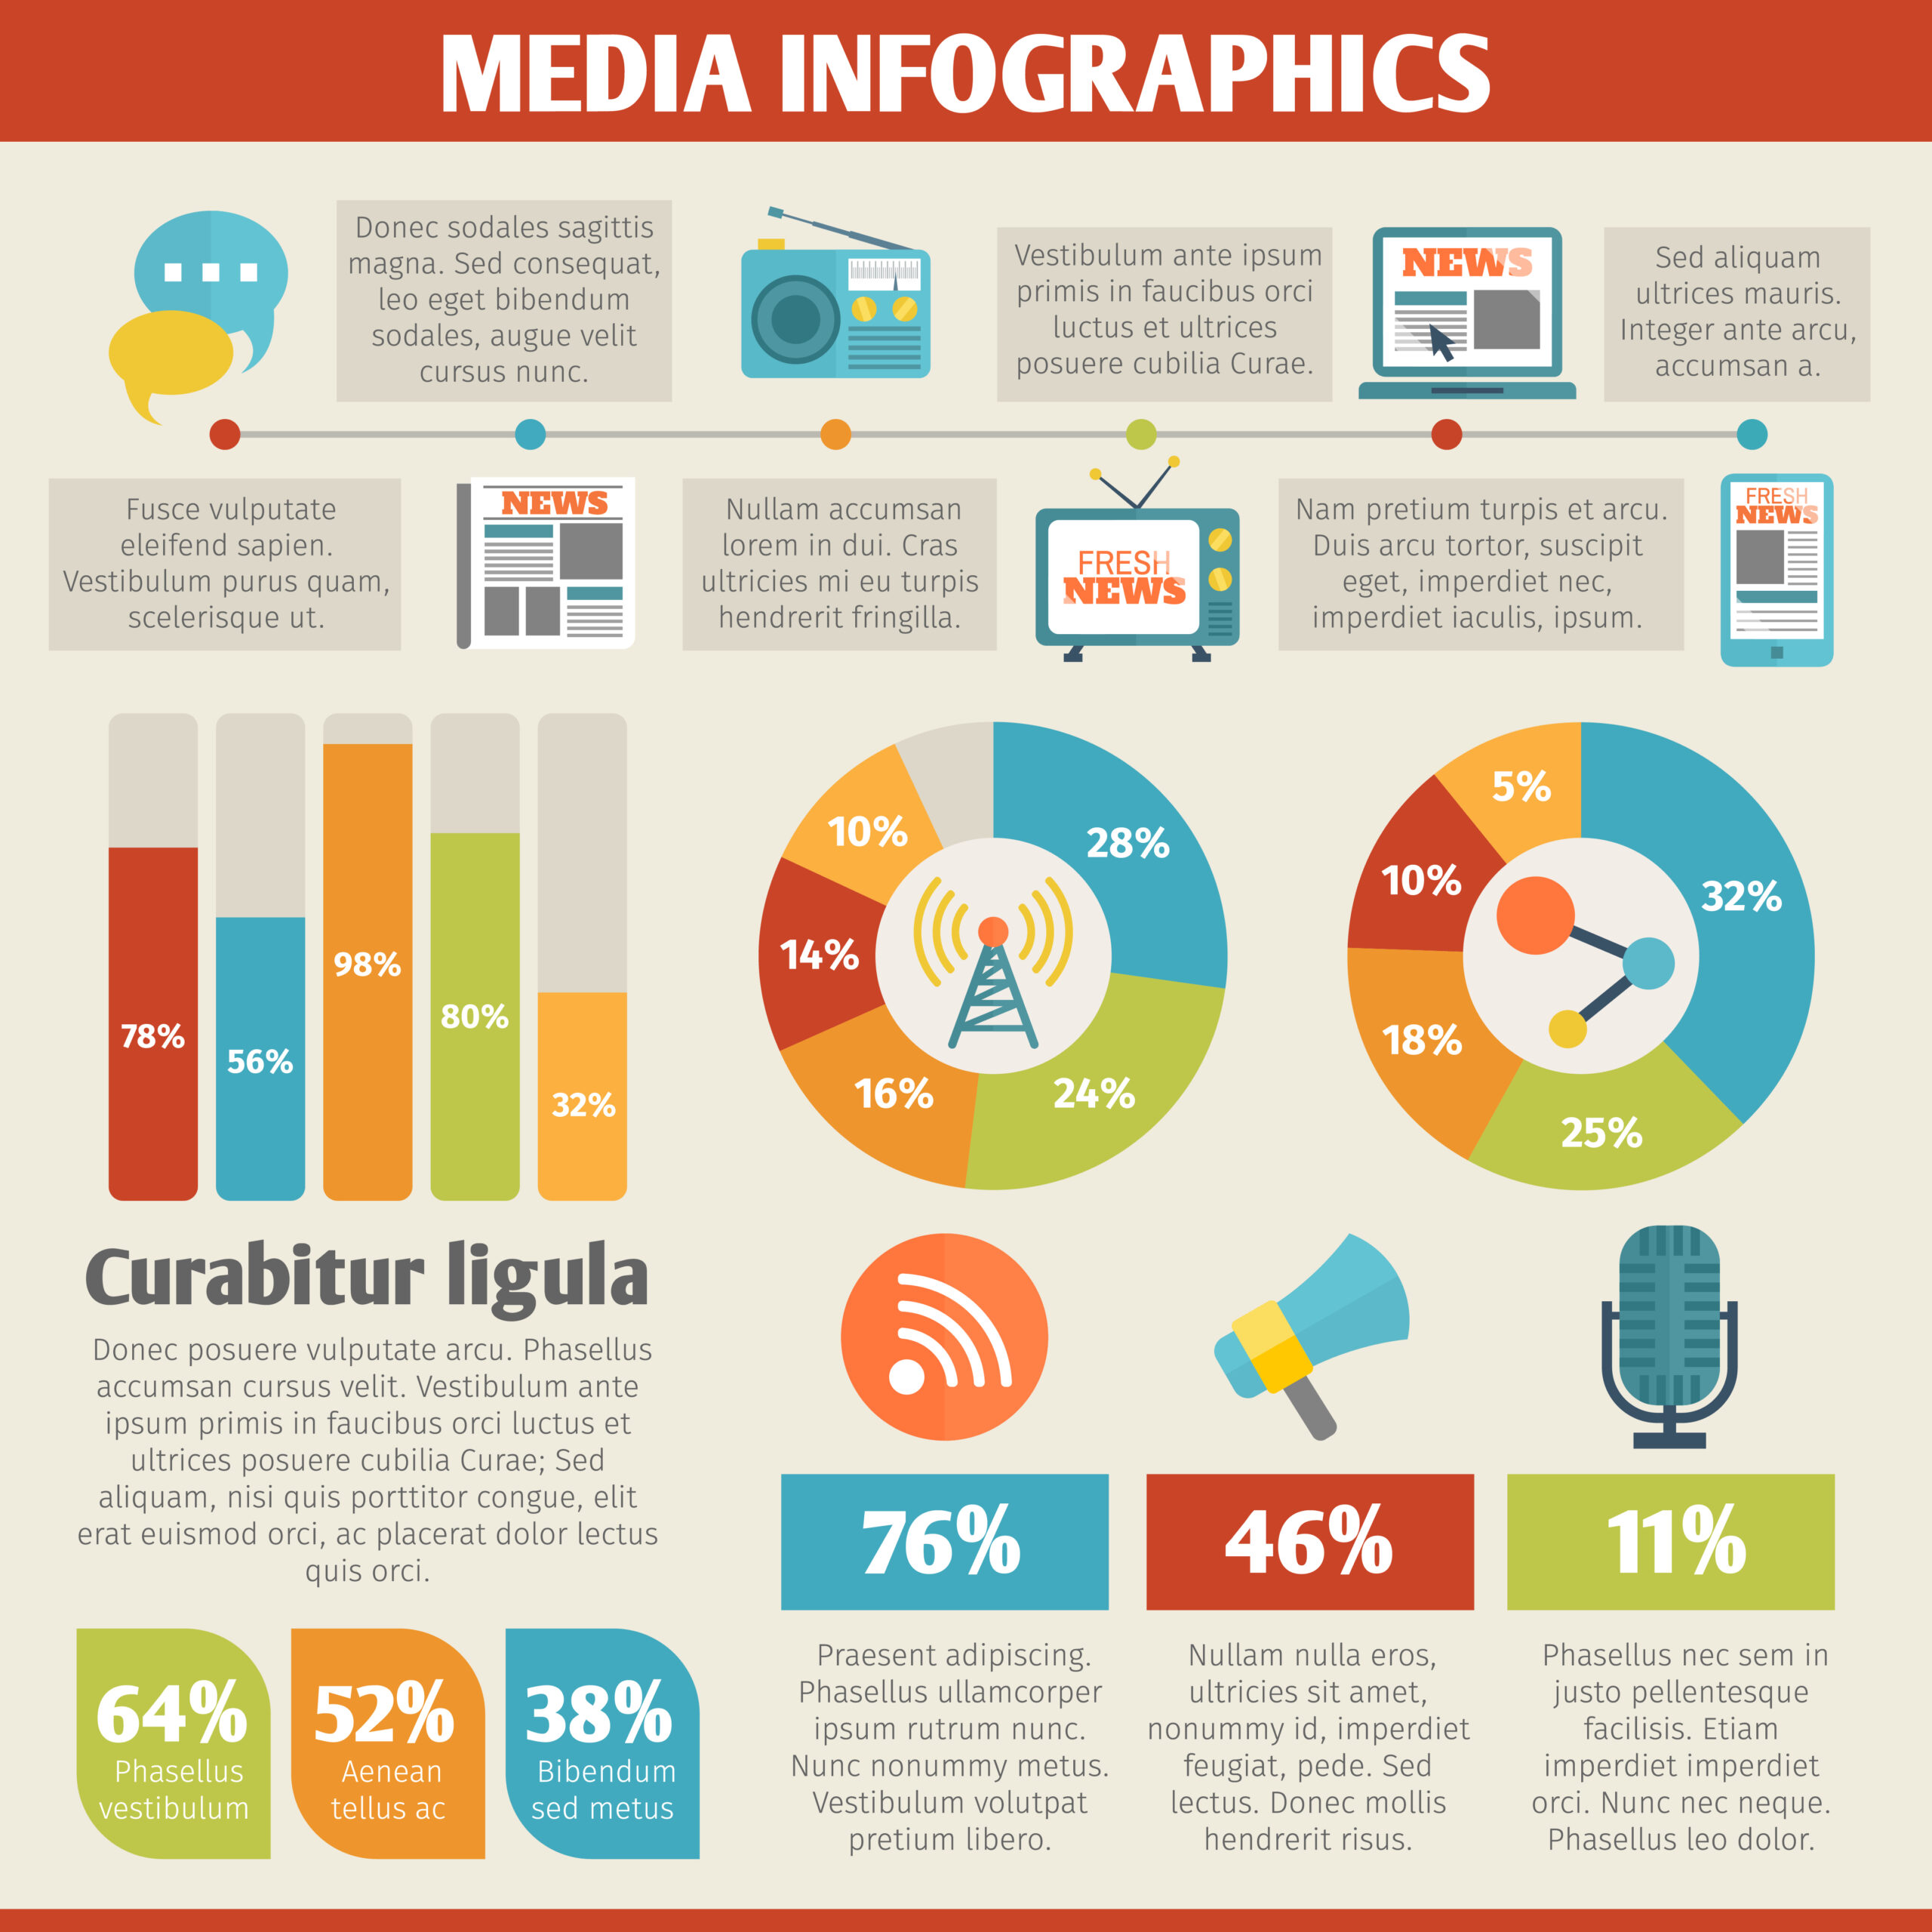 b"Infographics: Why Theyre Better than Plain Text - Project Assistant"